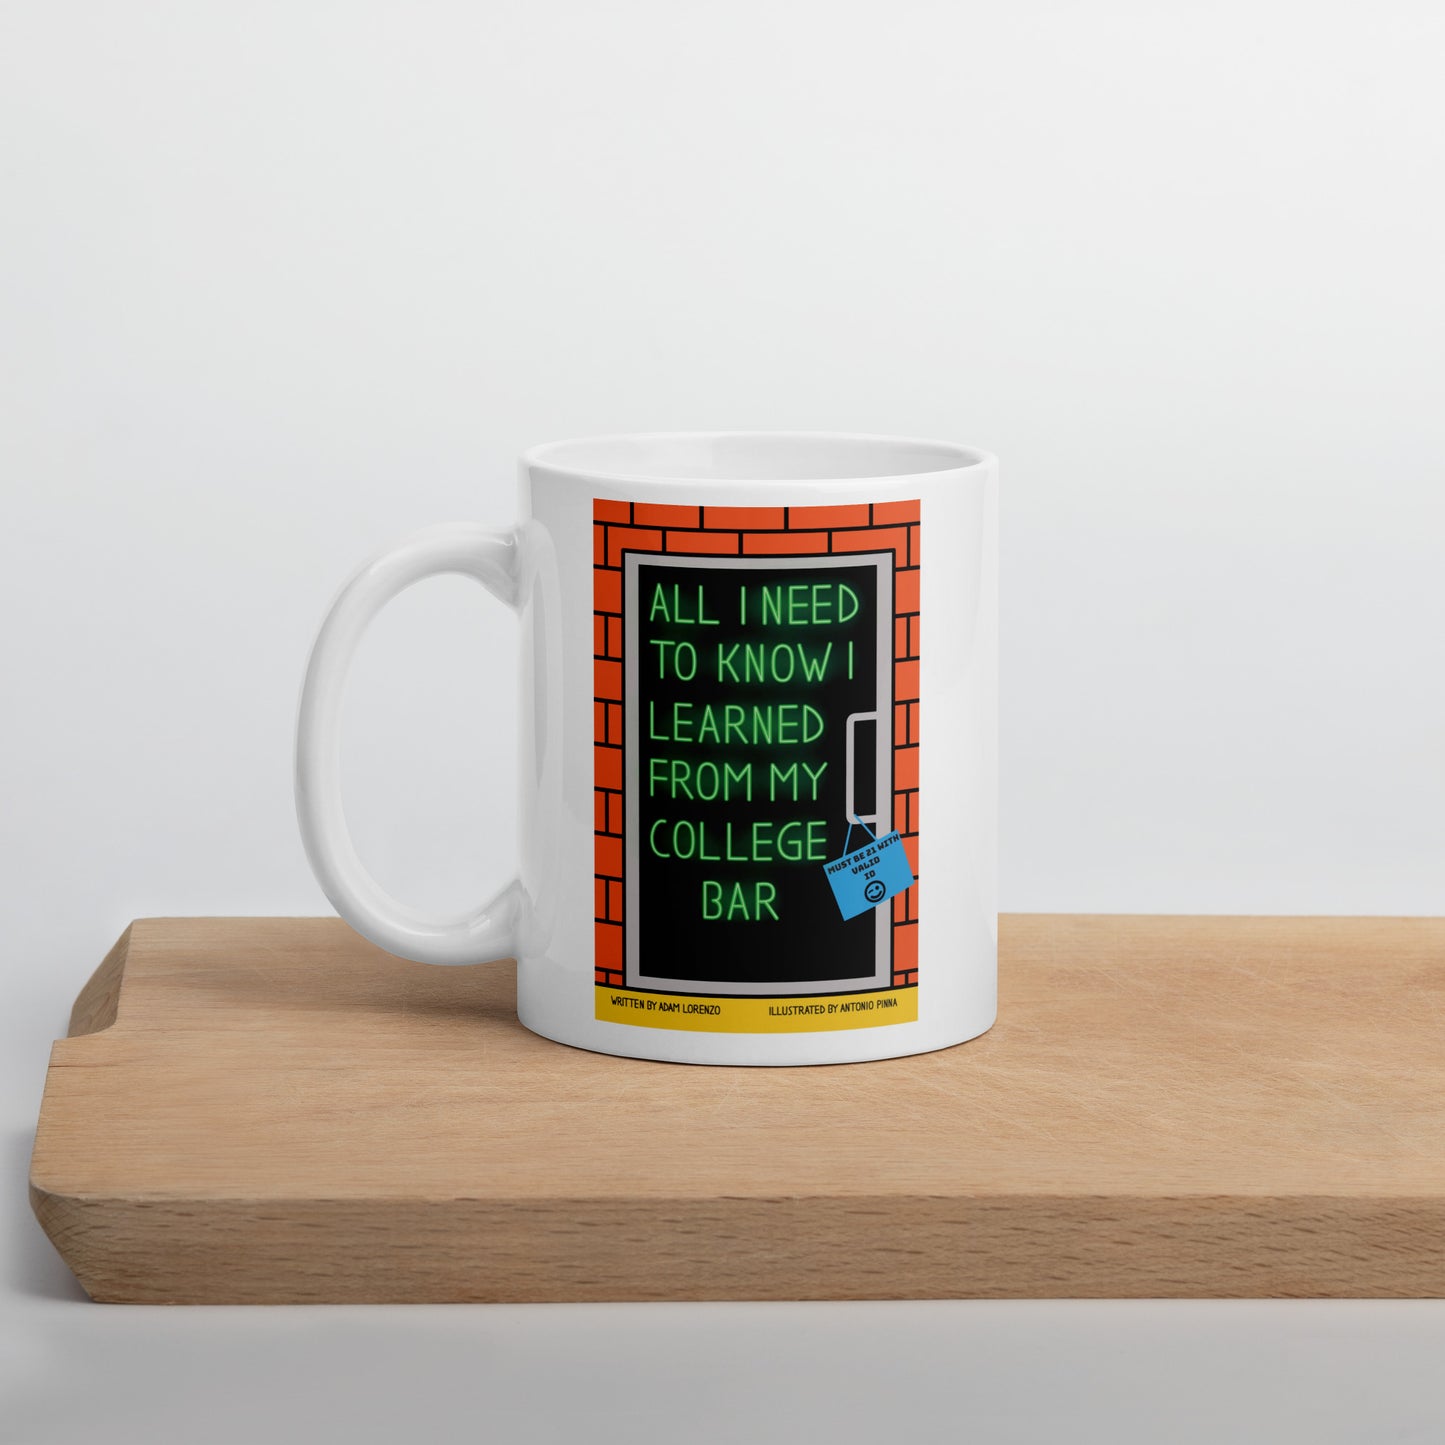 White mug says "All I Need To Know I Learned From My College Bar" on both sides 